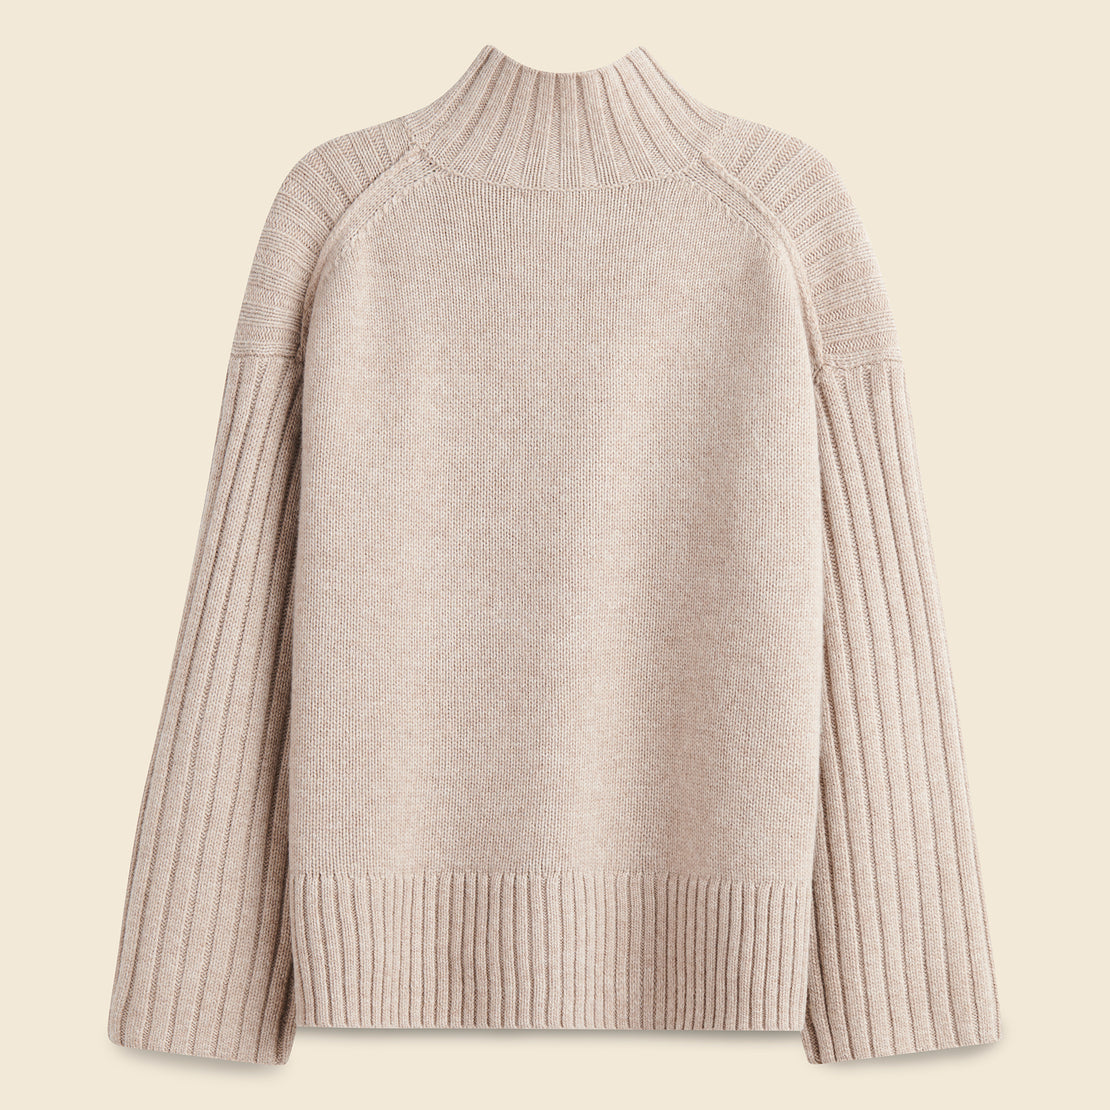 Chaley Rib Mock Neck Sweater - Heather Latte - Alex Mill - STAG Provisions - W - Tops - Sweater